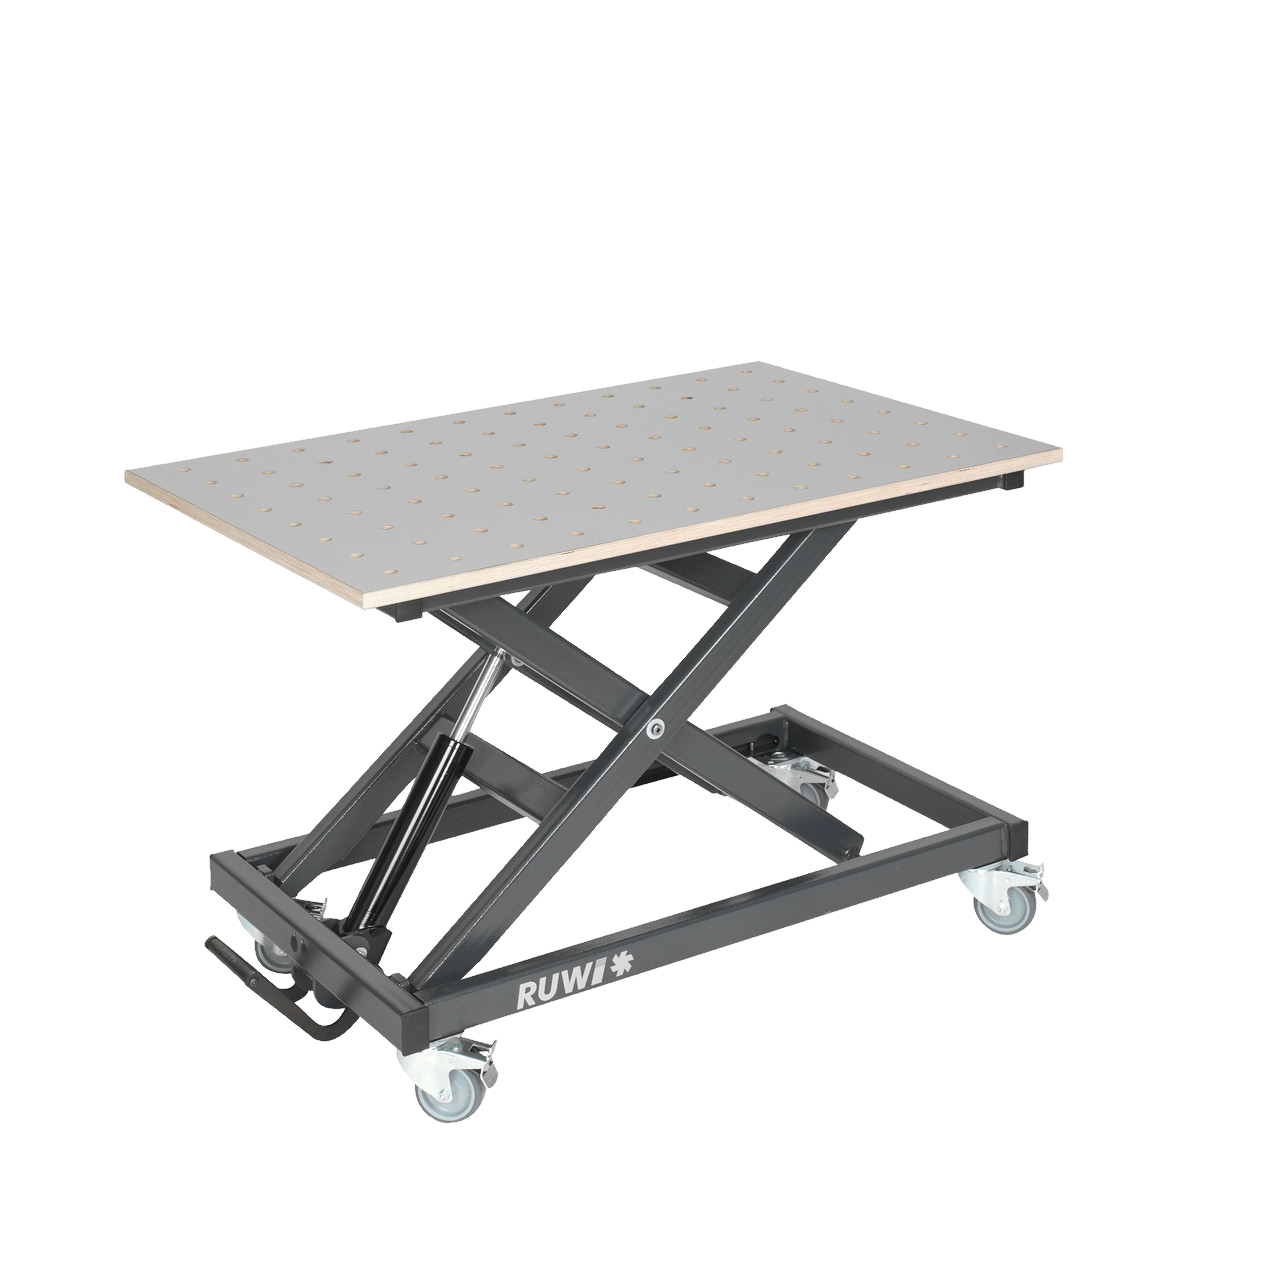 RUWI Lifting Table | 300kg Rated HPL Perforated Top with Ø20mm Hole for Woodworking, Carpentry and Cabinetmaking